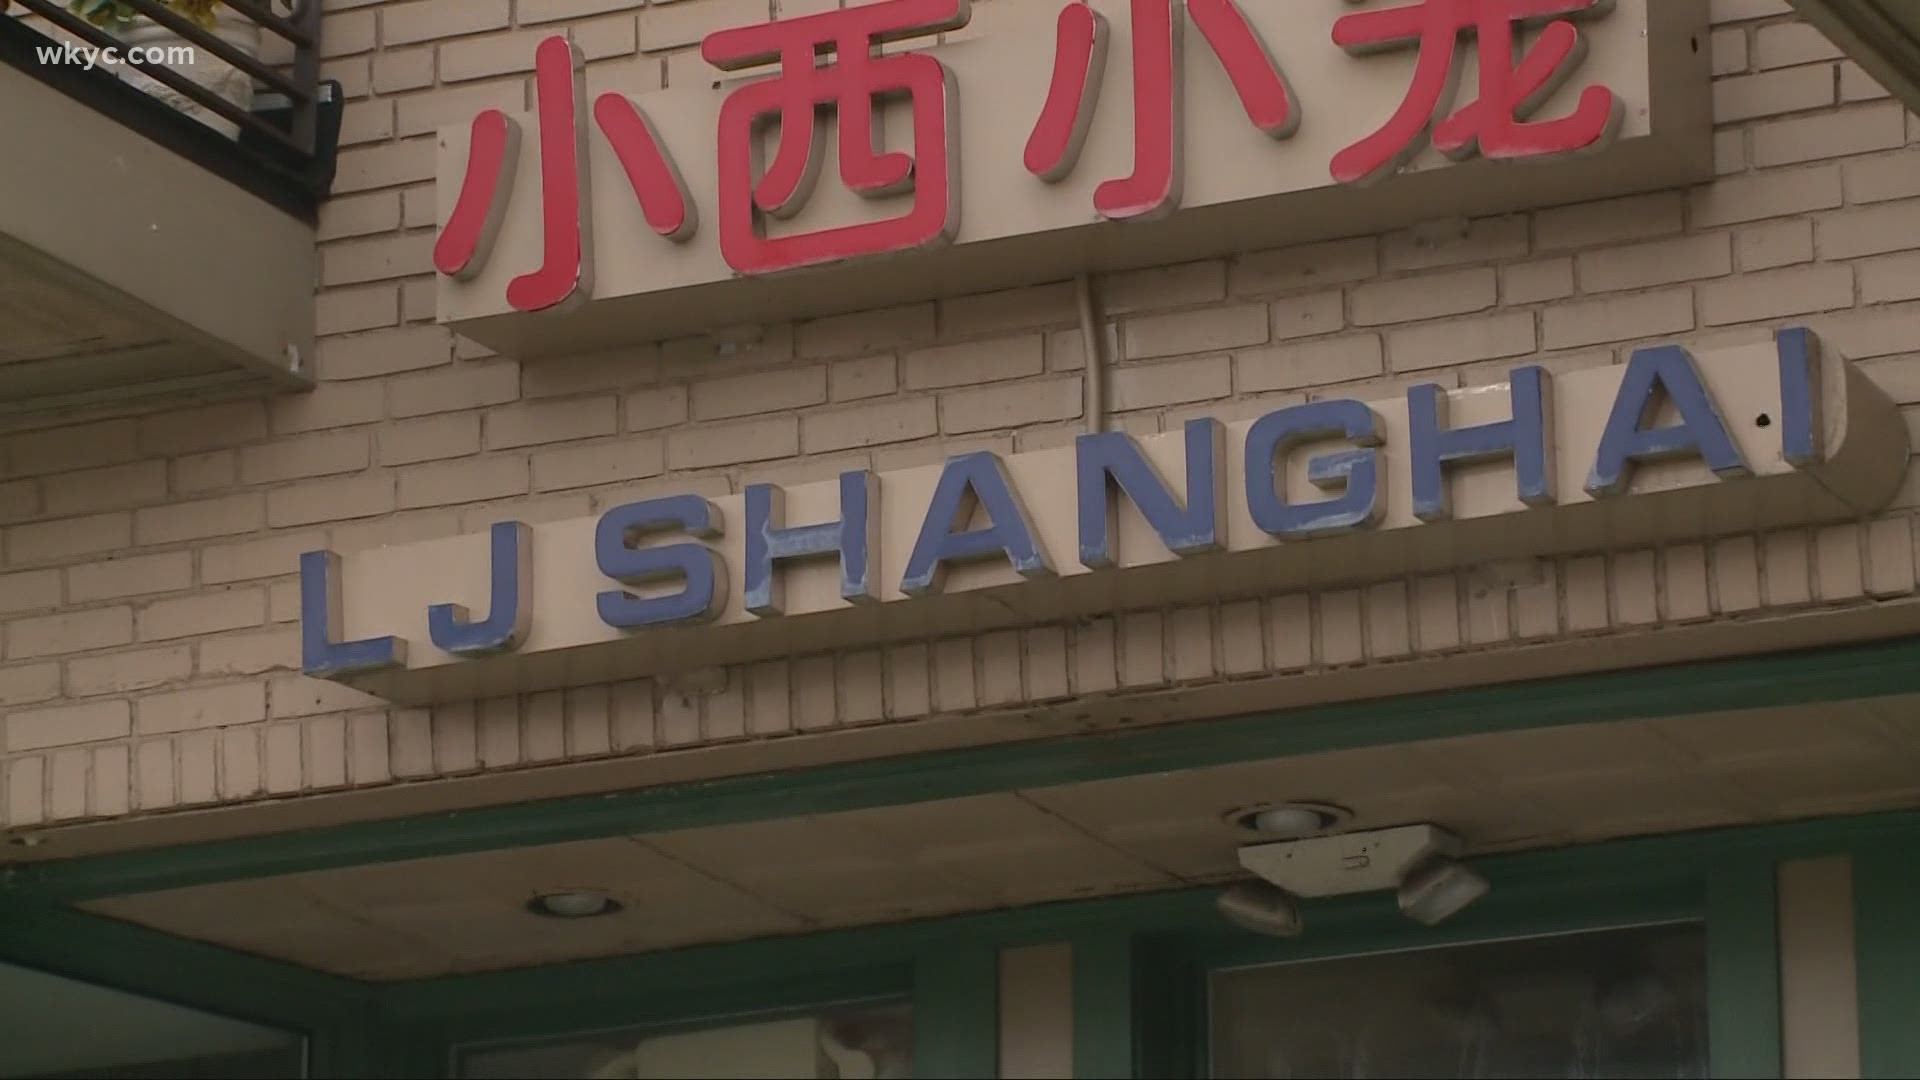 The owner of LJ Shanghai in Cleveland's AsiaTown says she has been targeted by anti-Asian phone calls.